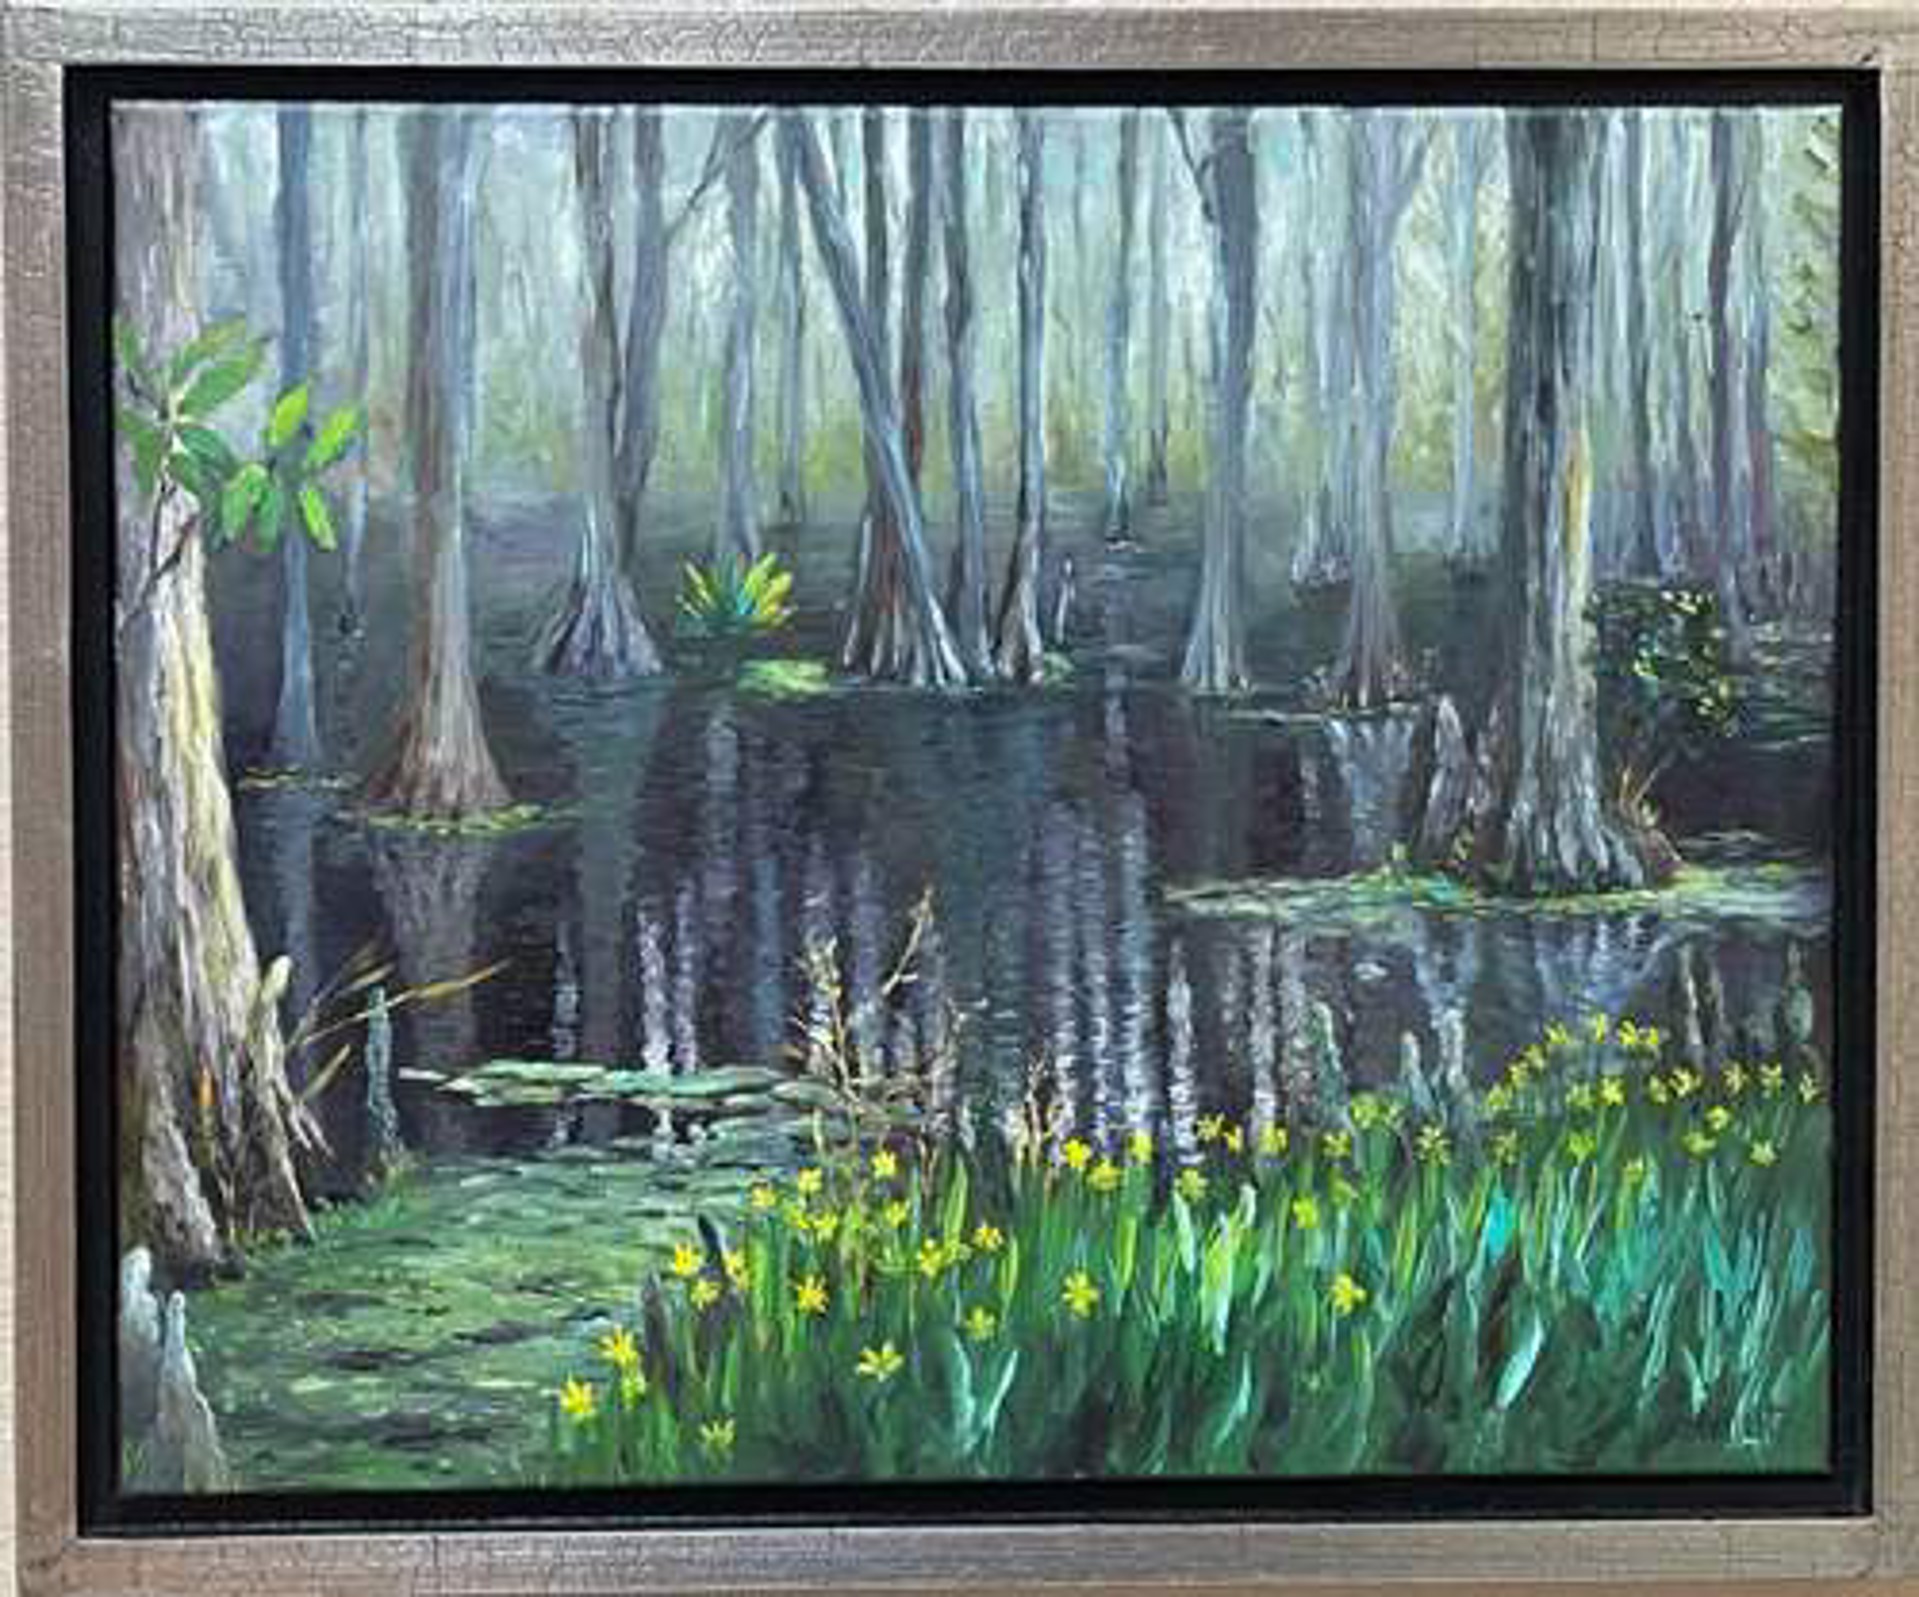 Daffodils Amongst the Trees by Cynthia Jewell Pollett